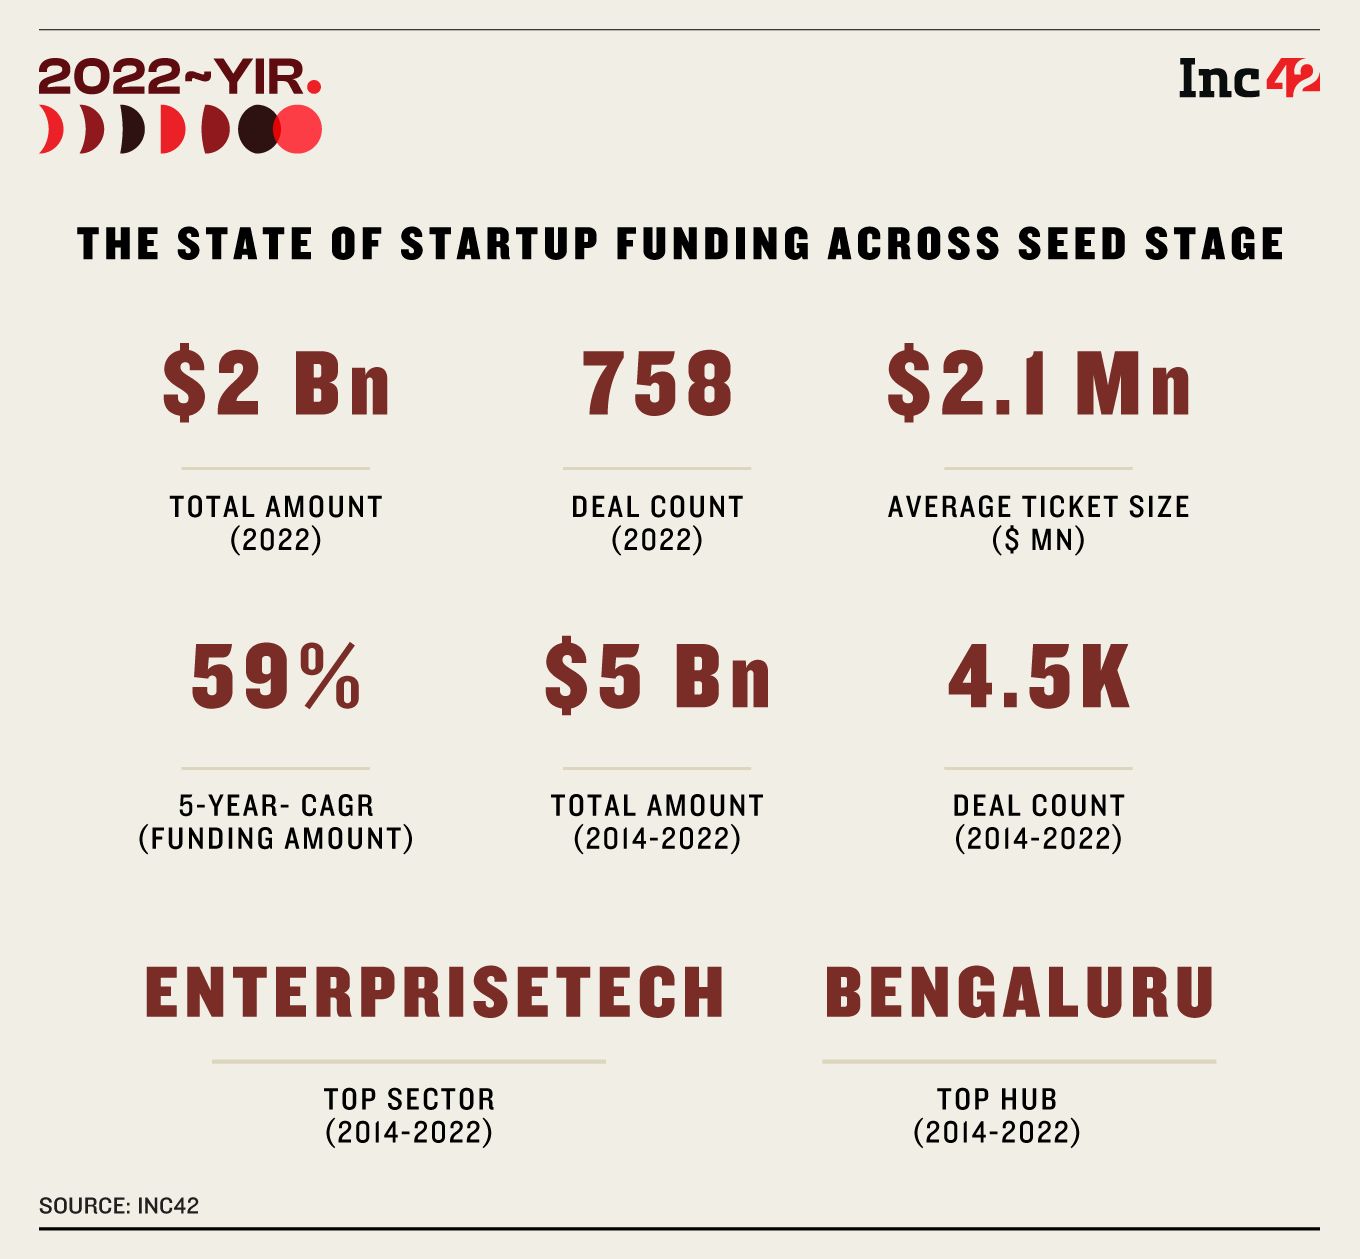 No Funding Blues For Early-Stage Startups As Investors Infuse $2 Bn Across 750+ Deals